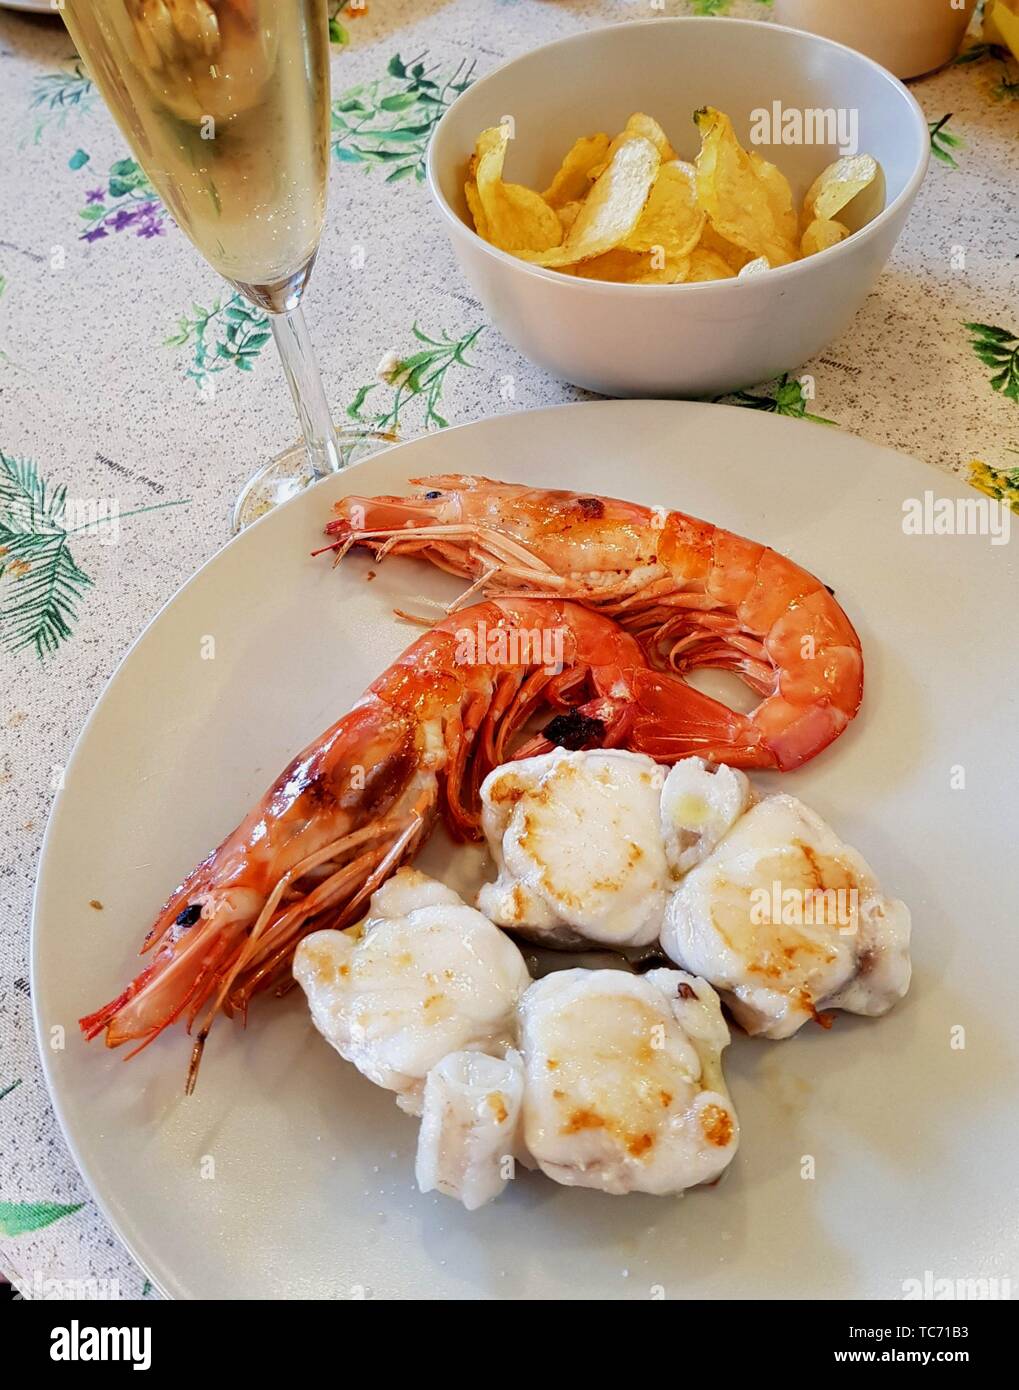 Food. Spanish. Grilled prawns, monk fish and potato chips. Catalan culinary delicacy. Barcelona. El Maresme, Catalunya. Spain Stock Photo